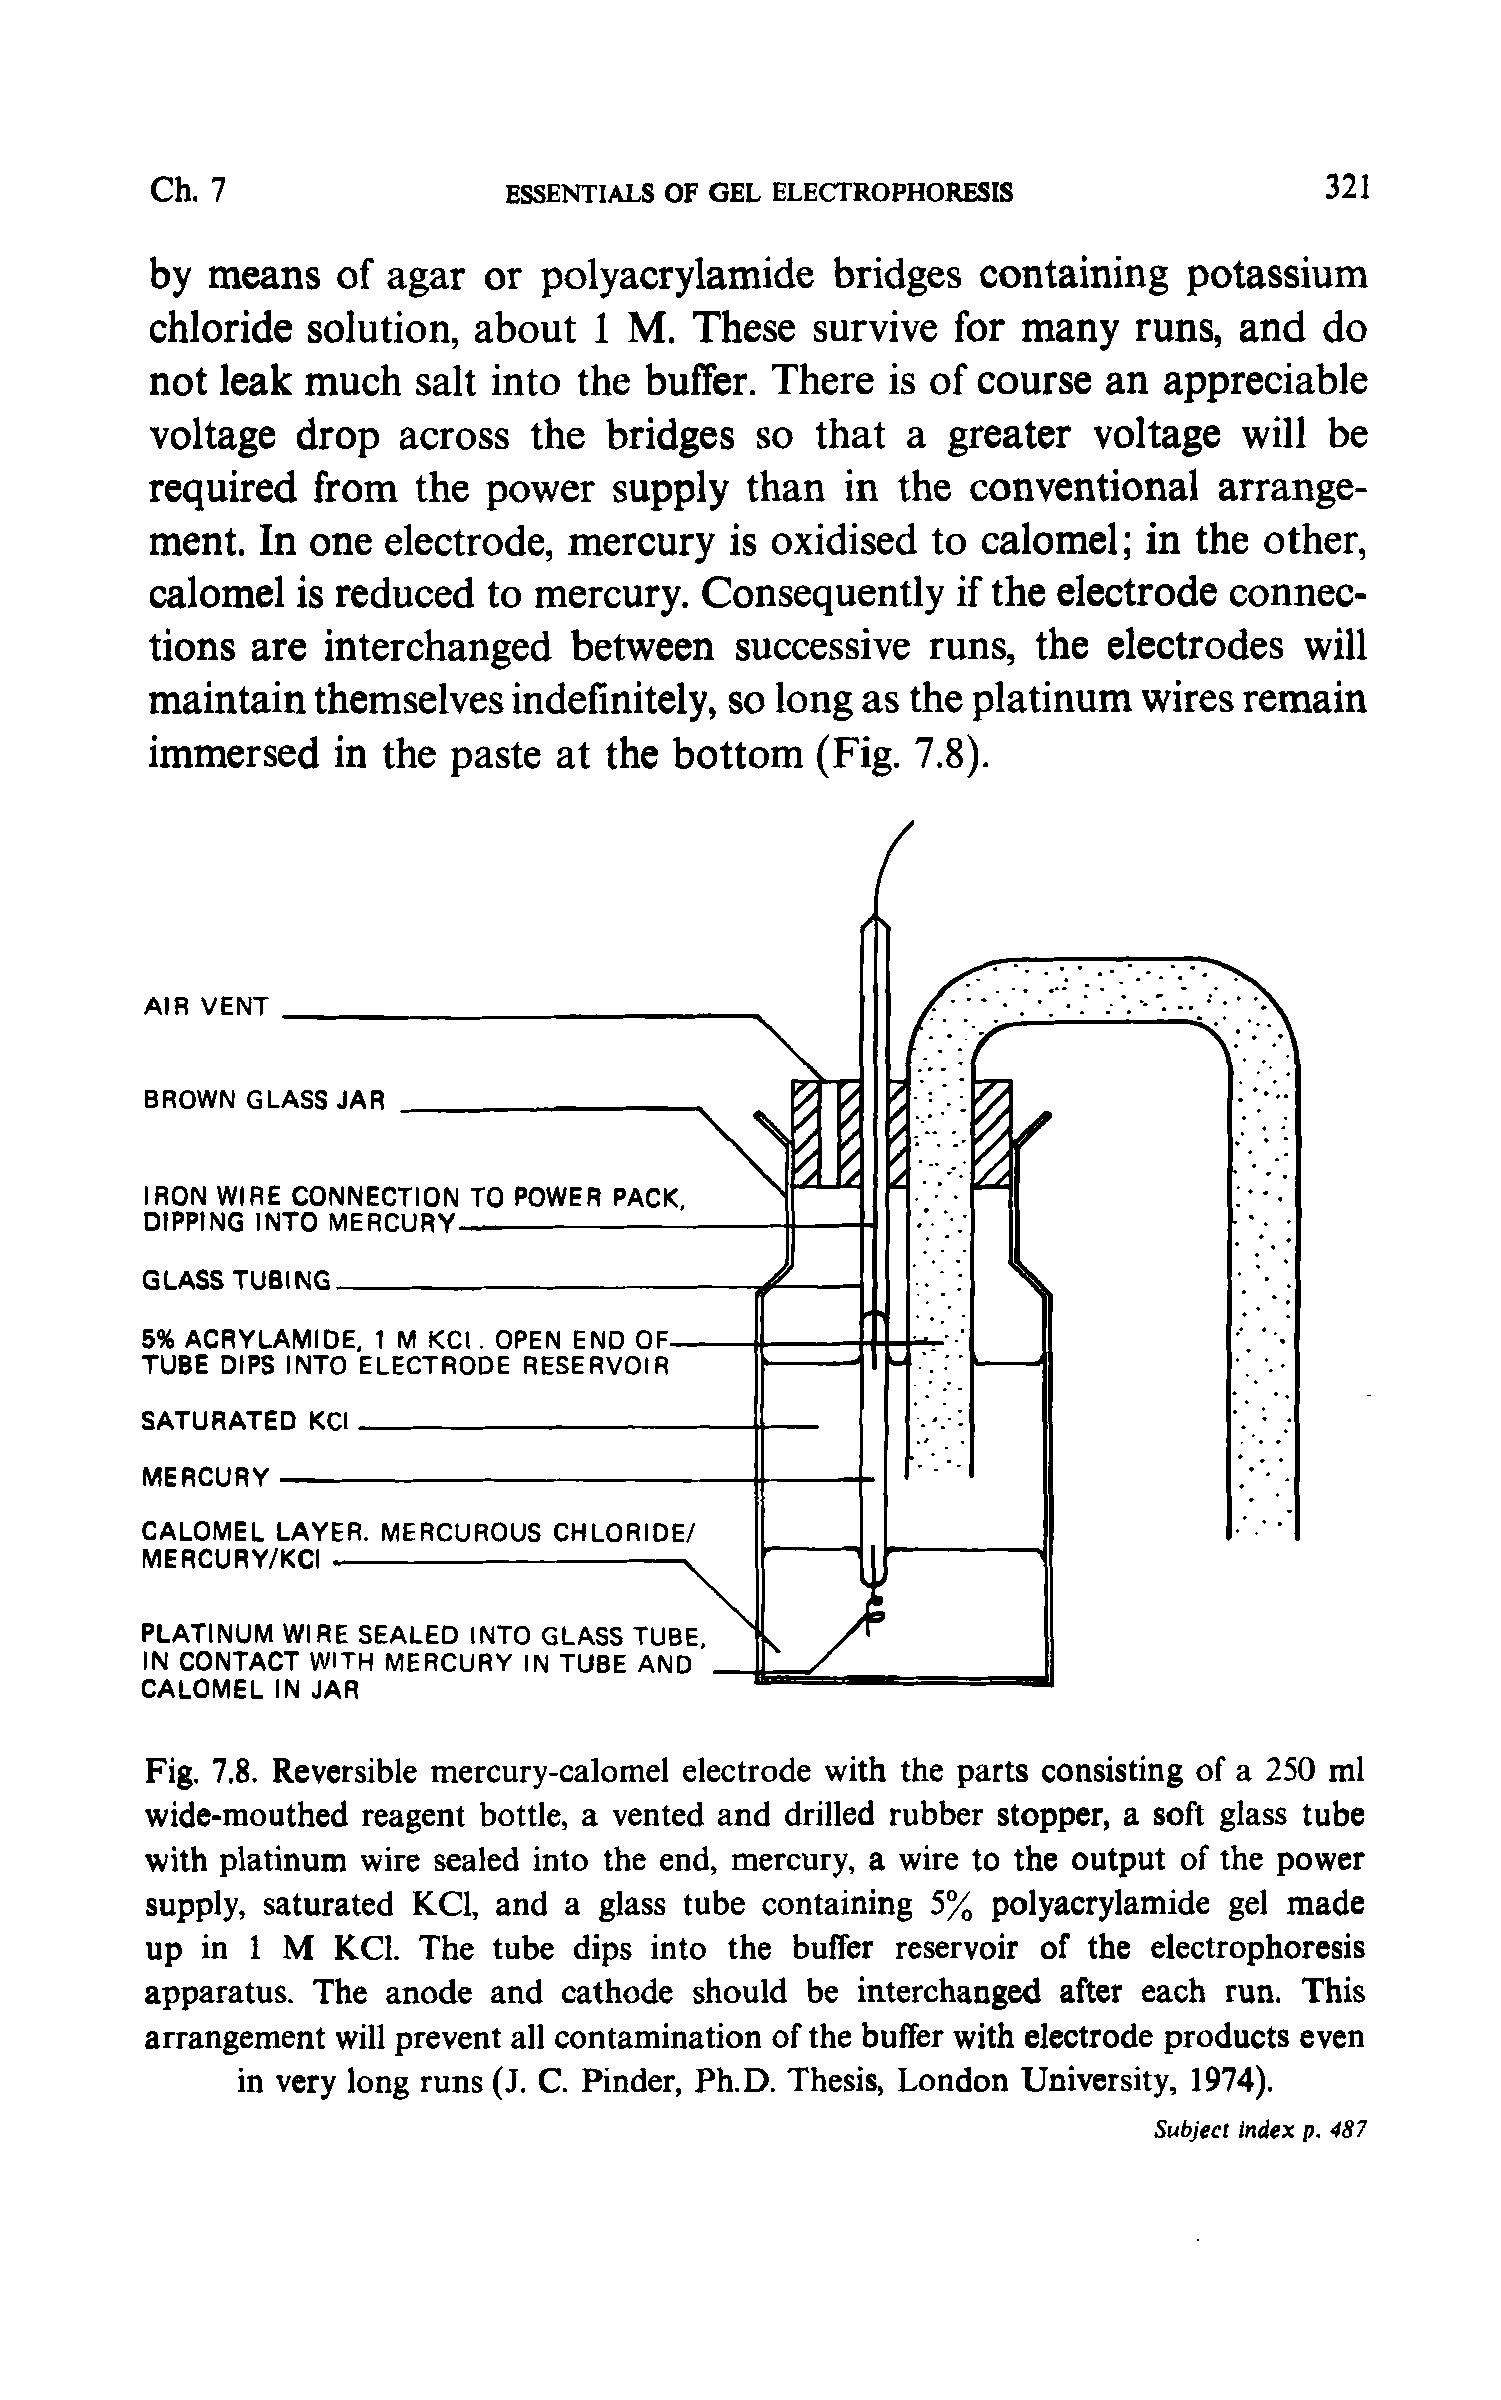 Fig. 7,8. Reversible mercury-calomel electrode with the parts consisting of a 250 ml wide-mouthed reagent bottle, a vented and drilled rubber stopper, a soft glass tube with platinum wire sealed into the end, mercury, a wire to the output of the power supply, saturated KCl, and a glass tube containing 5% polyacrylamide gel made up in 1 M KCl. The tube dips into the buffer reservoir of the electrophoresis apparatus. The anode and cathode should be interchanged after each run. This arrangement will prevent all contamination of the buffer with electrode products even in very long runs (J. C. Finder, Ph.D. Thesis, London University, 1974).